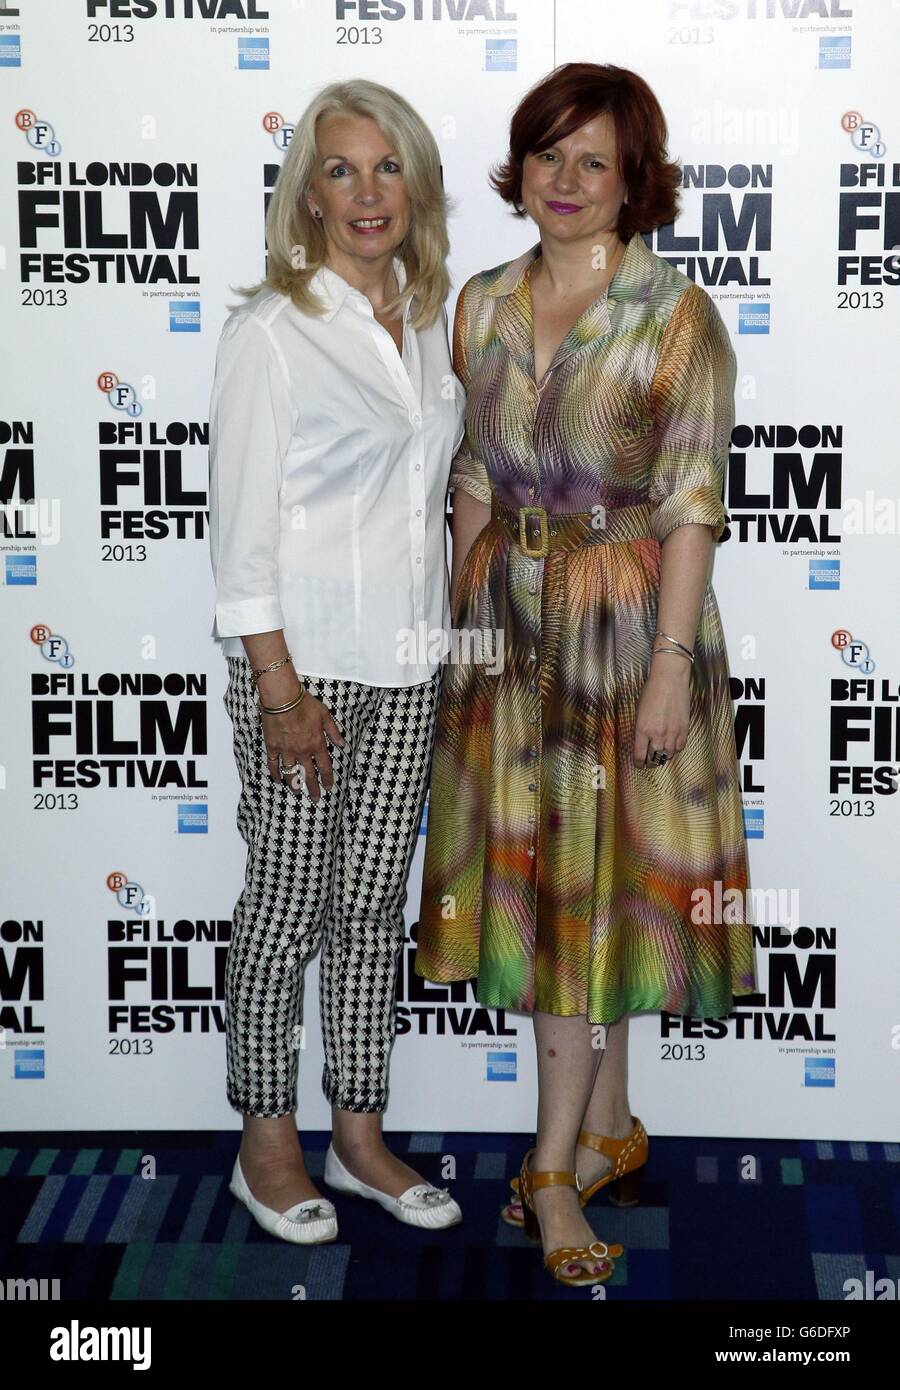 Clare Stewart, BFI Head of Cinemas and Festivals (right) and Amanda Nevill, BFI CEO (left) attend a photocall at the Odeon Cinema, Leicester Square, London as part of a launch event for the 57th BFI London Film Festival. Stock Photo